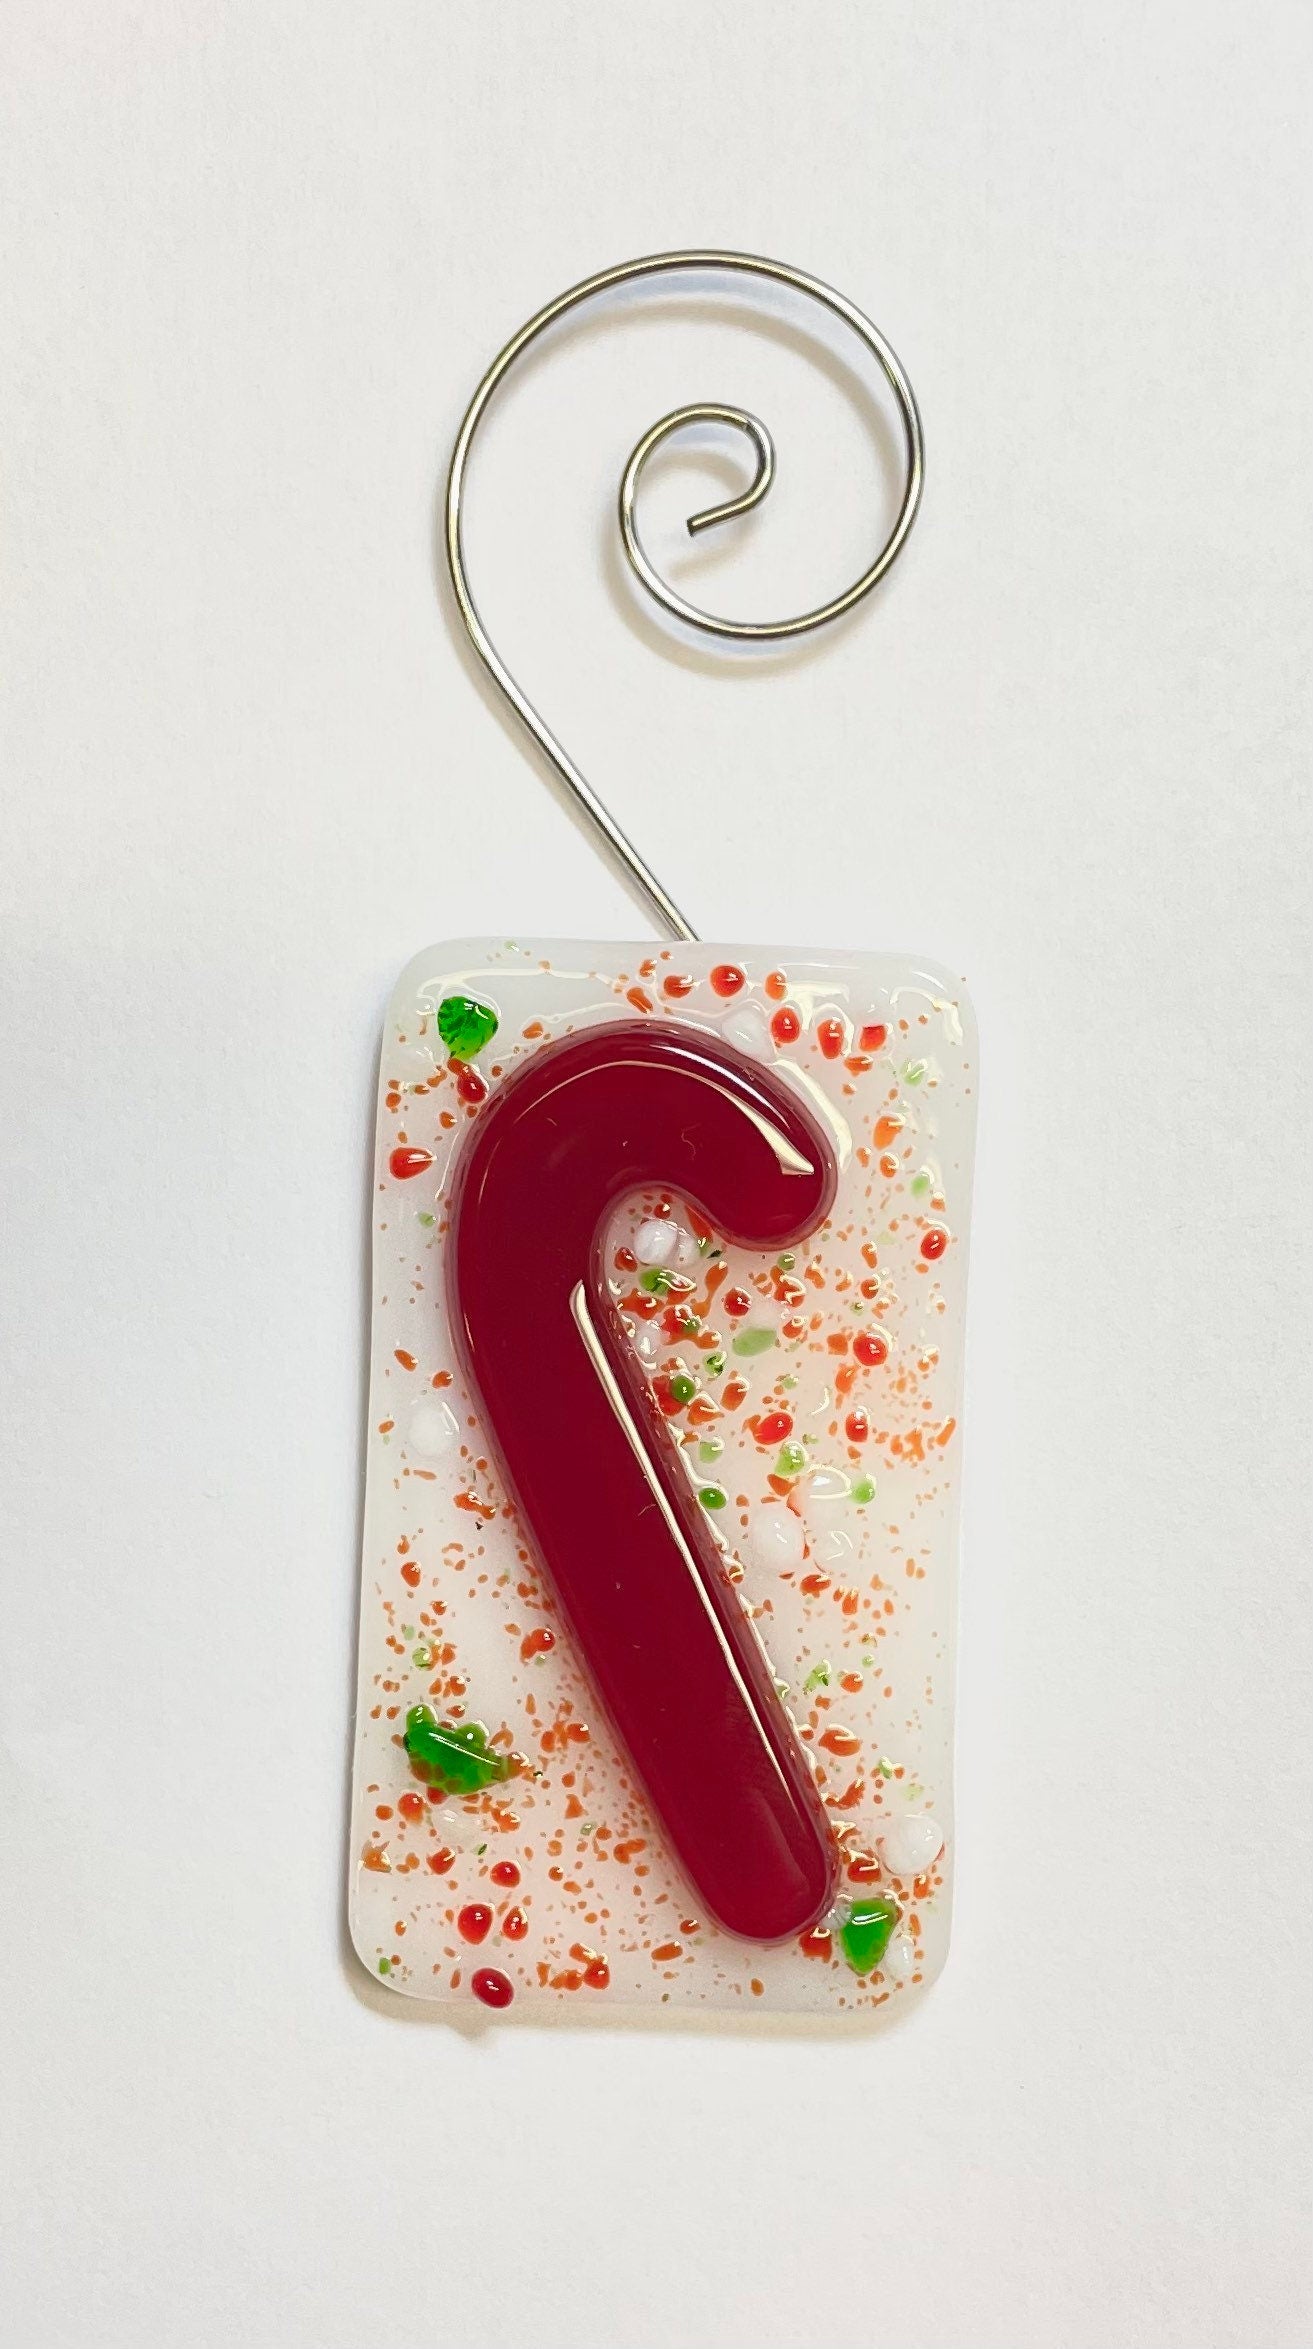 Candy Cane Fused Glass Christmas Ornament